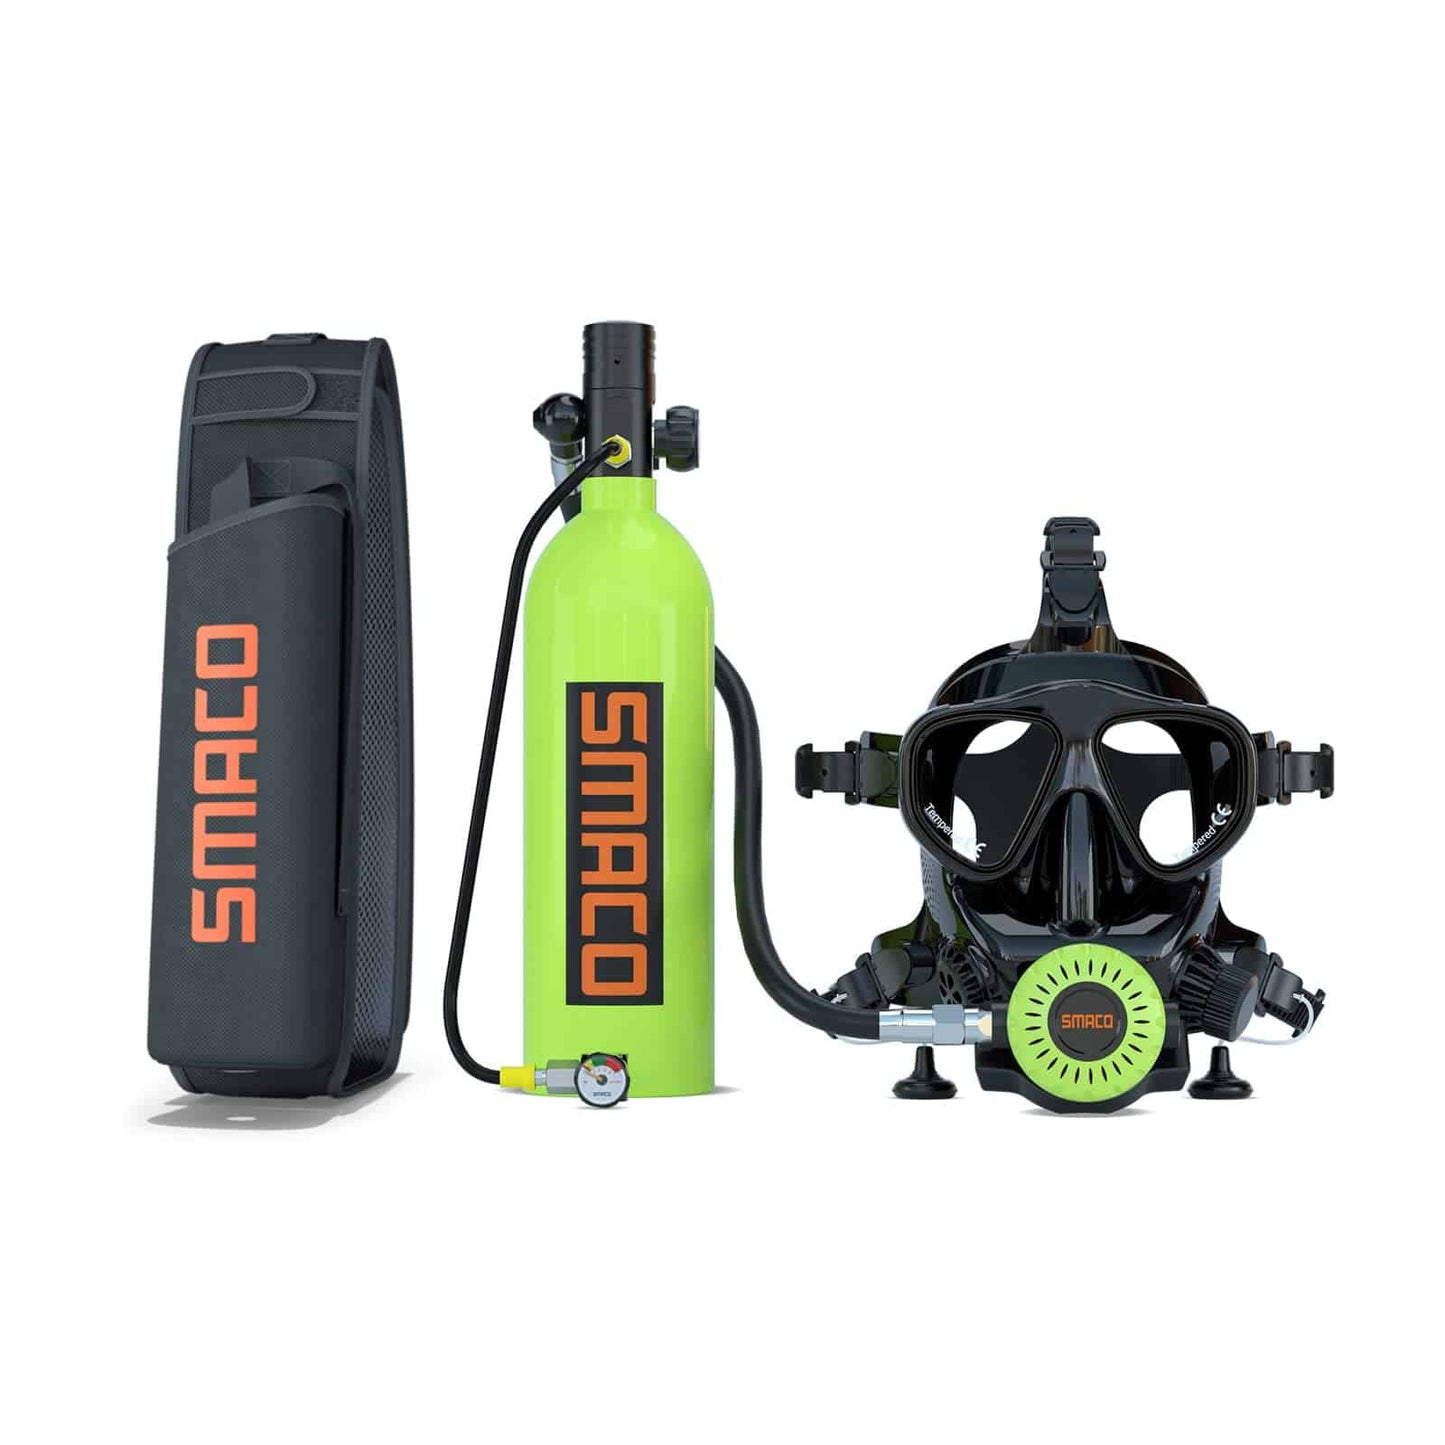 SMACO S400 Pro 1L Portable Mini Diving Tank Reusable Pony Bottle — with Full Face Diving Mask